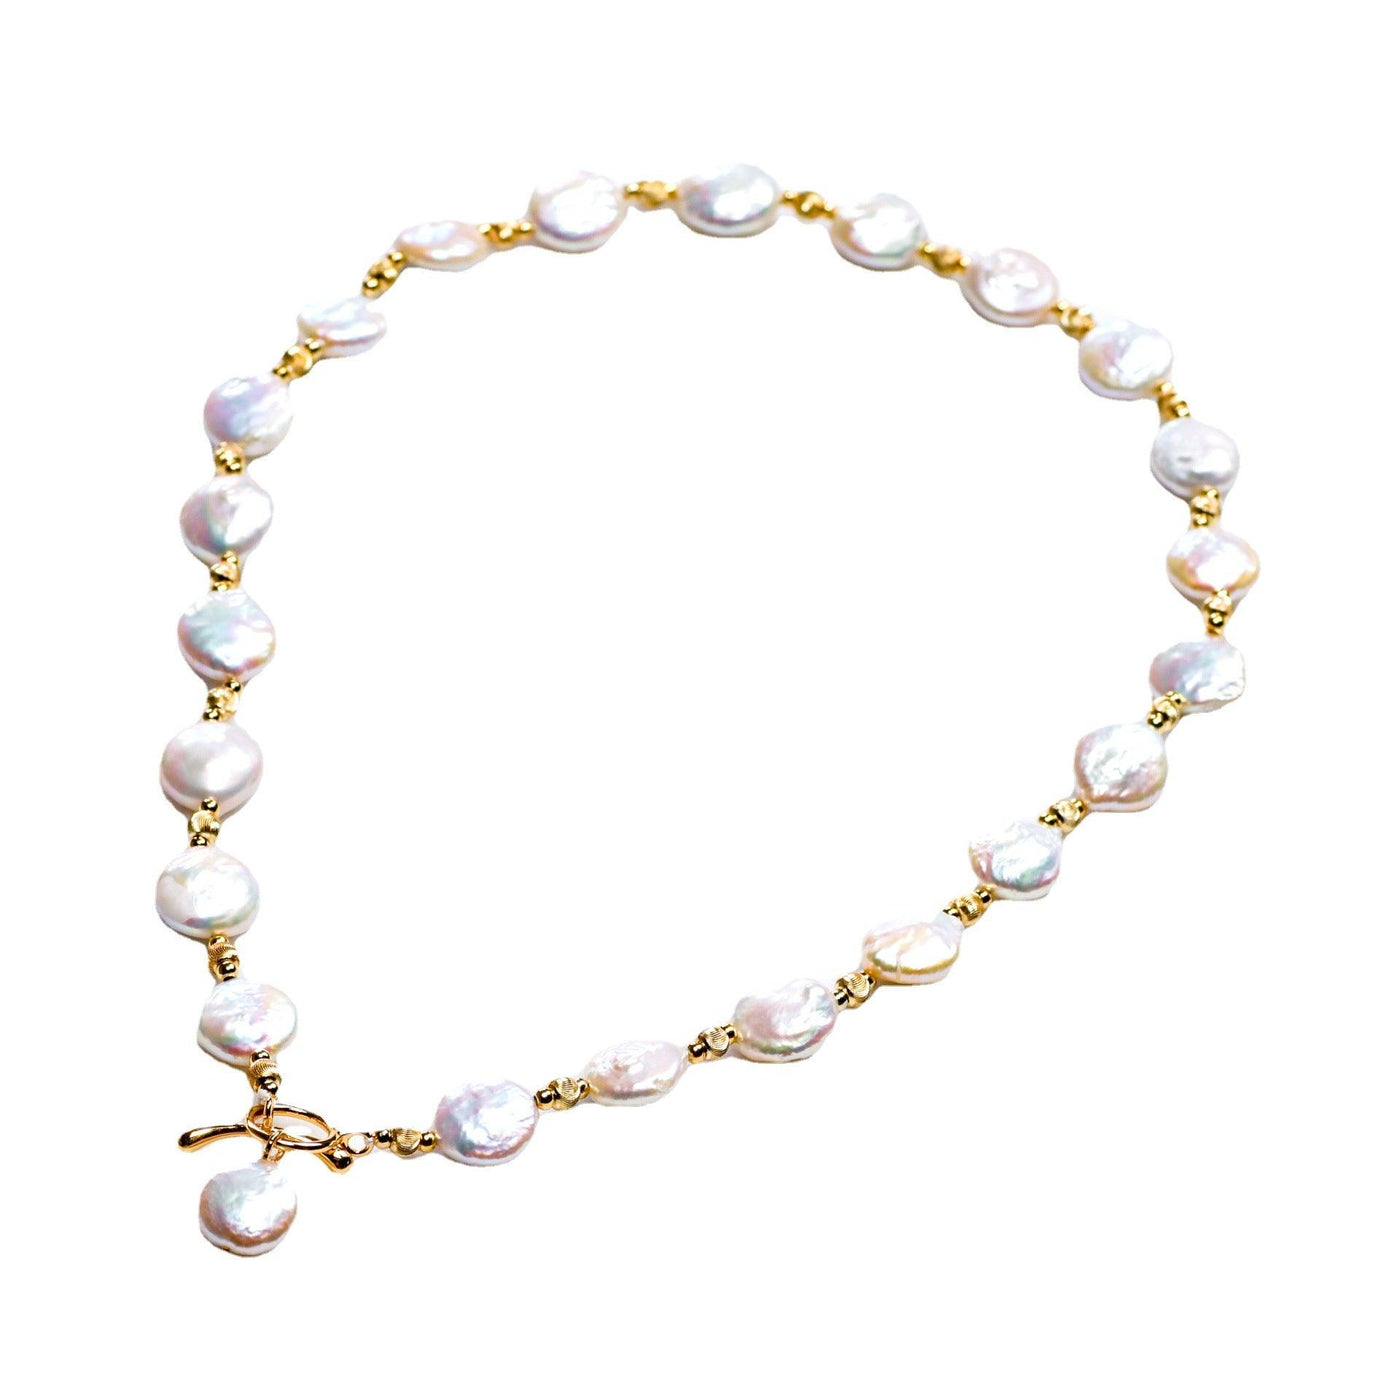 Shaped Baroque Freshwater Pearl 12-13mm Button Necklace | MODE BY OH